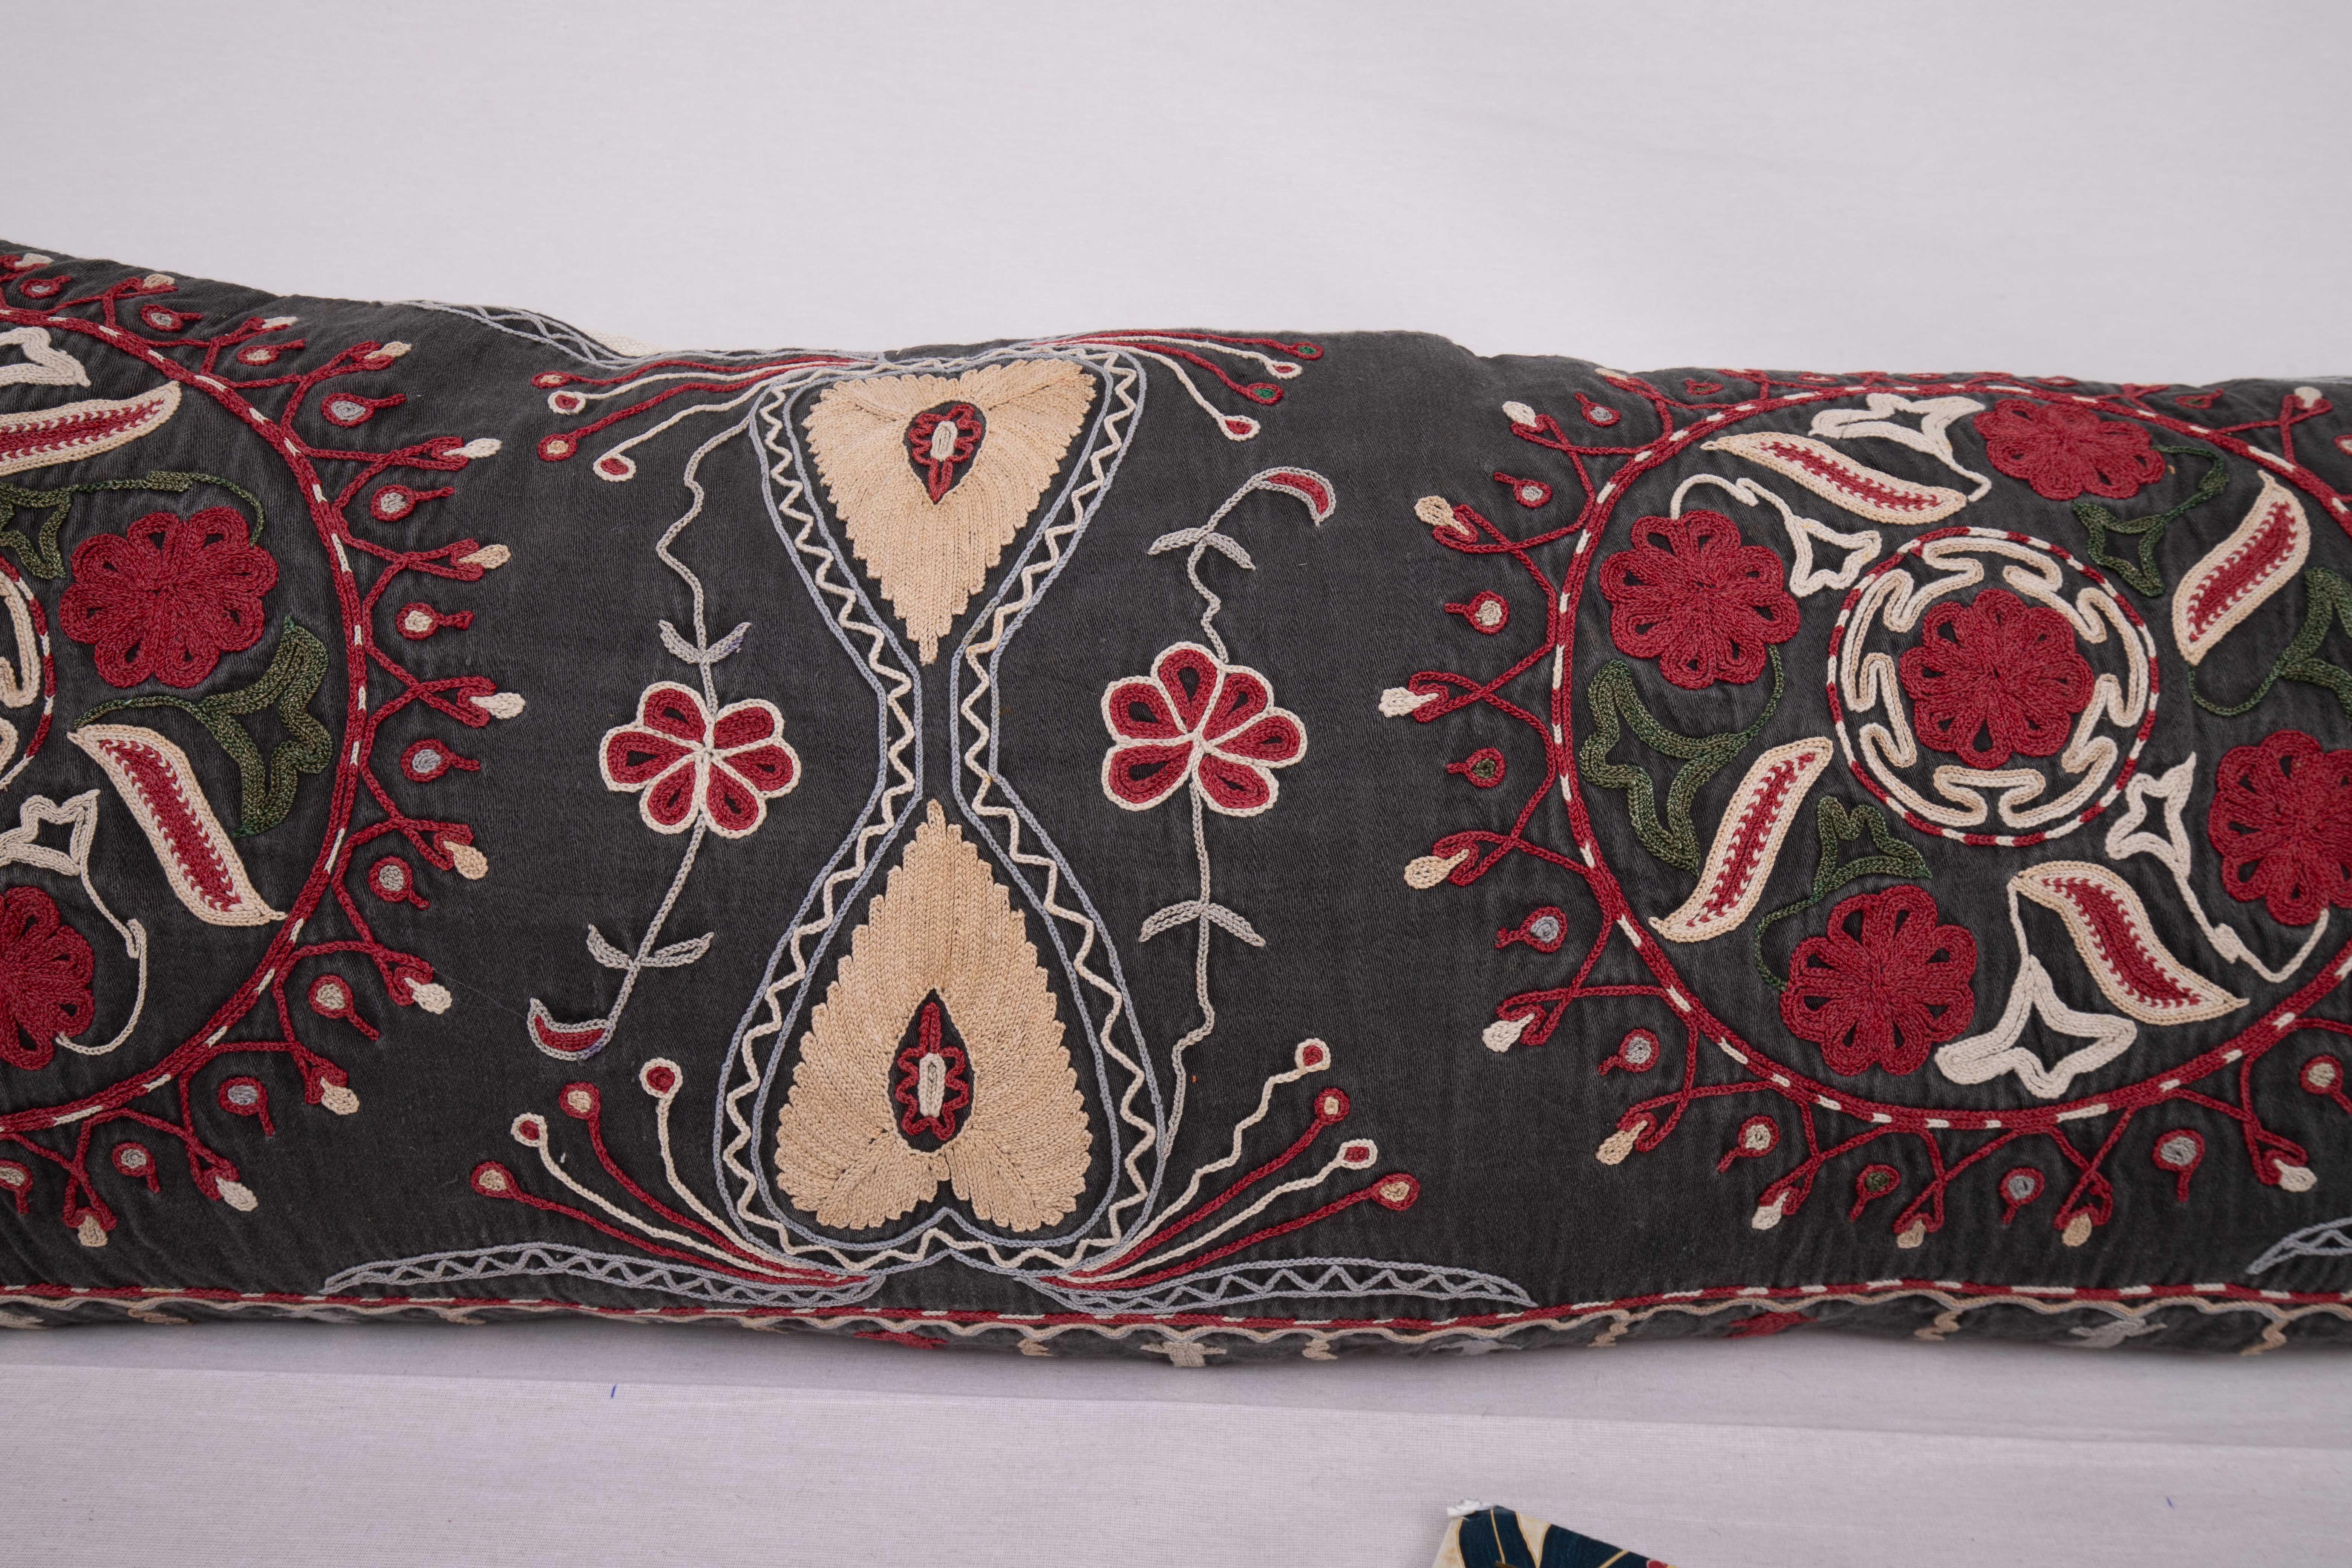 Embroidered Lumbar Pillowcase Made from a Mid-20th C, Kazak / Kyrgyz Embroidery For Sale